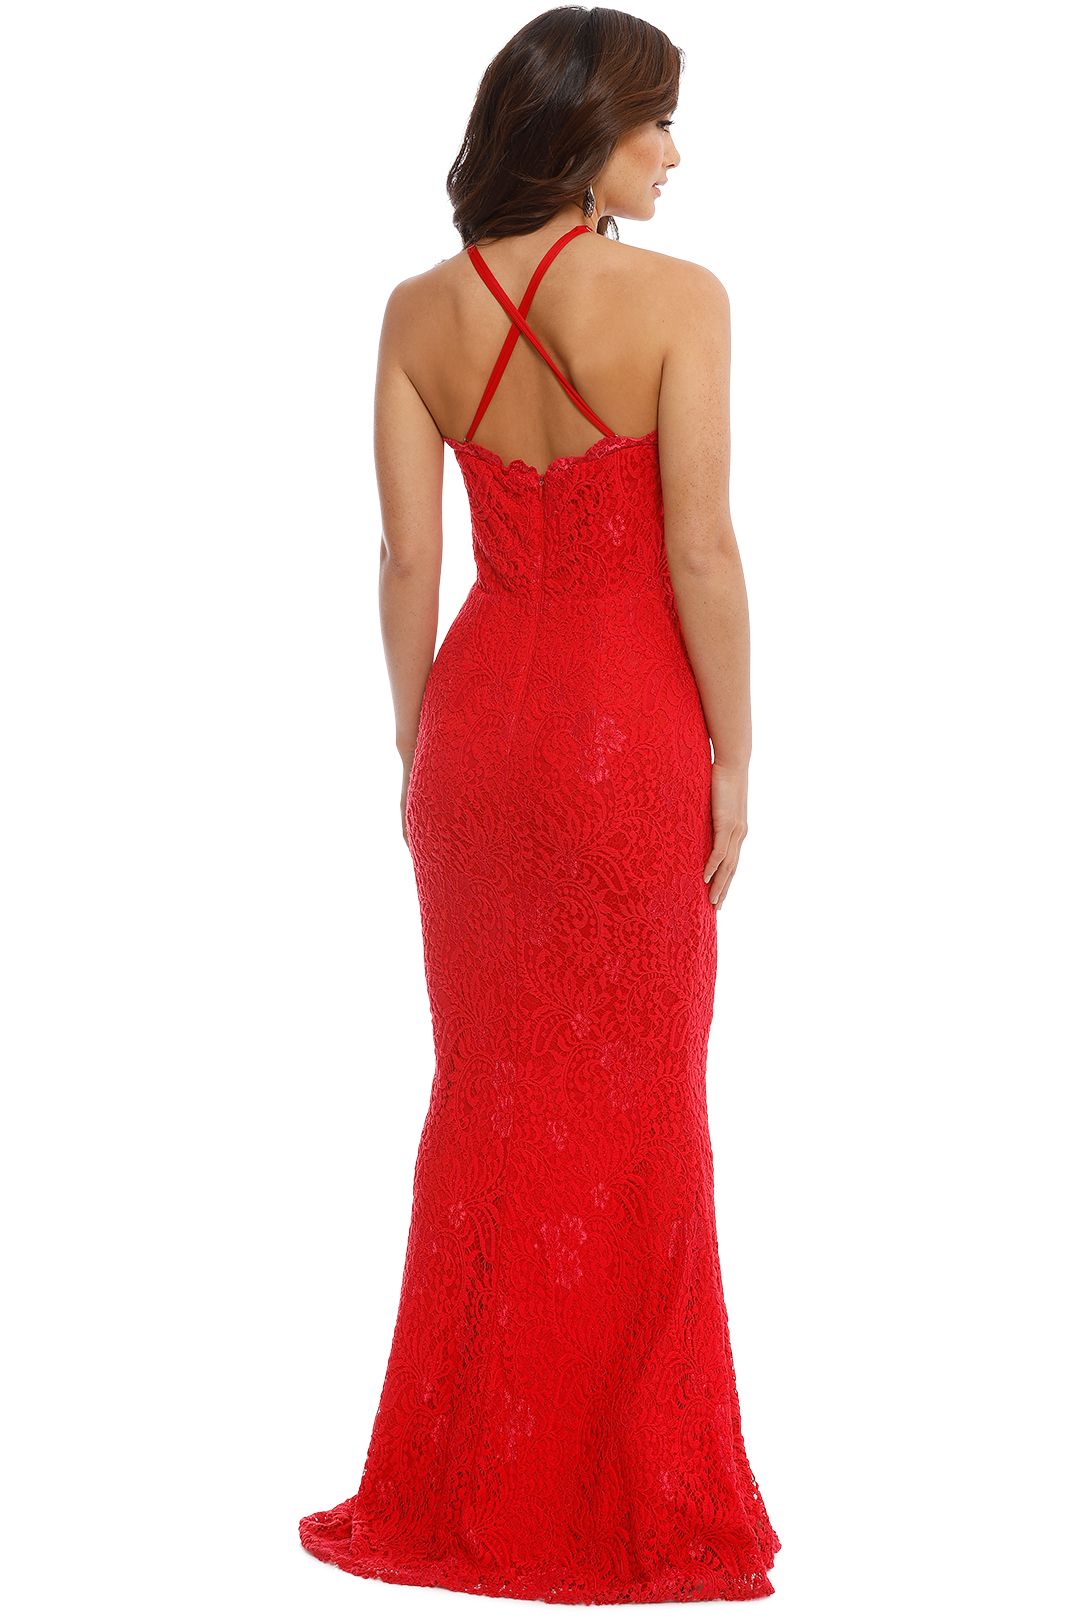 Elle Zeitoune - Lori Red Gown - Red - Back